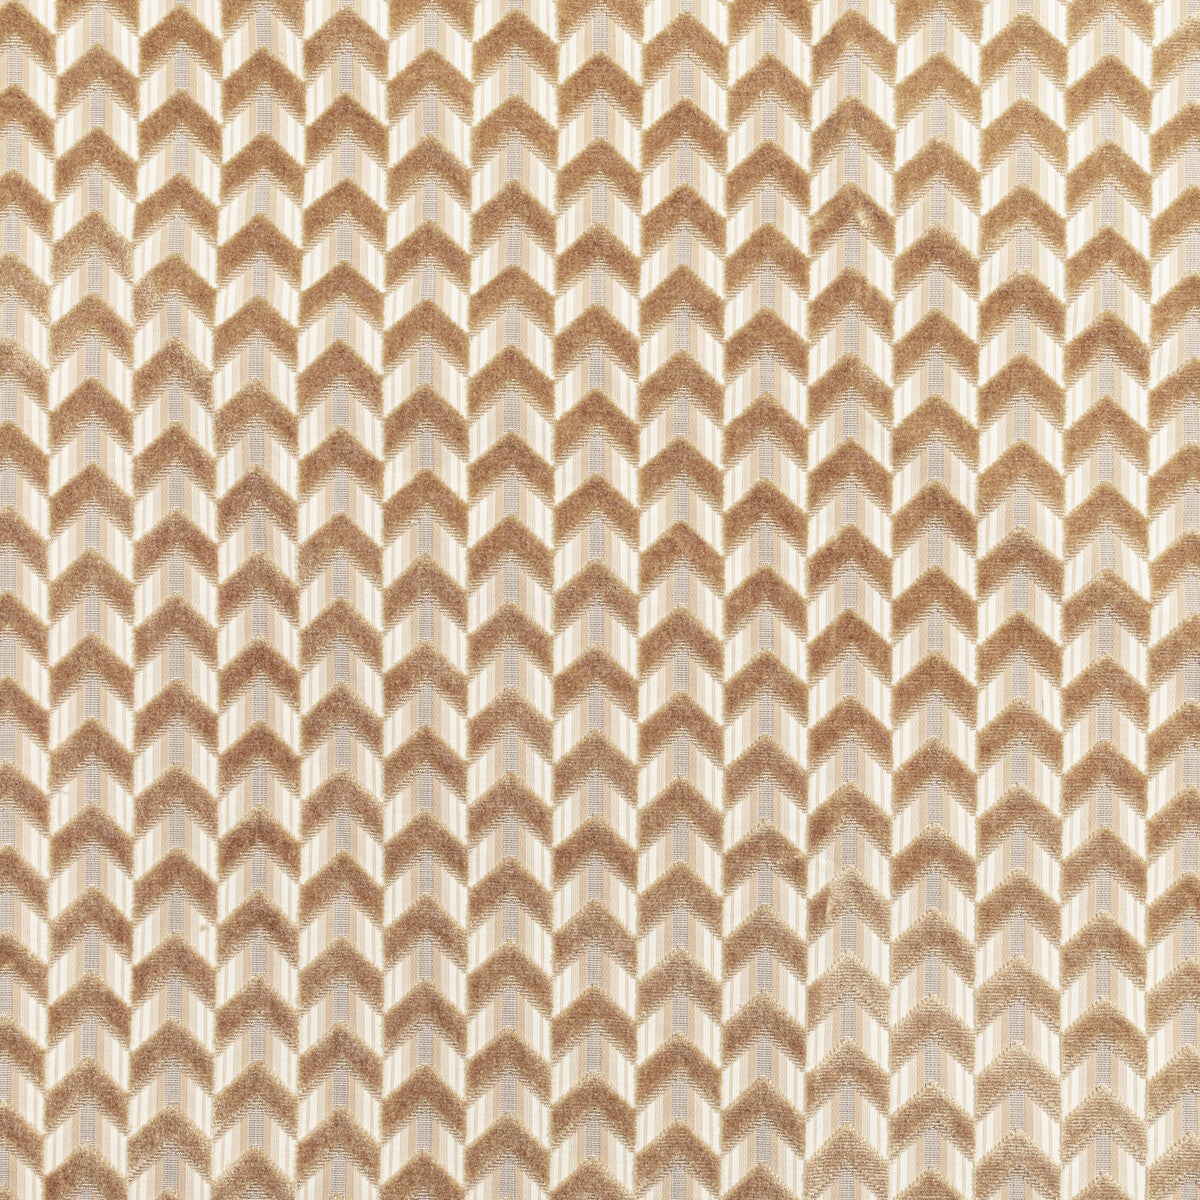 Bailey Velvet fabric in sand color - pattern 2020207.164.0 - by Lee Jofa in the Breckenridge collection